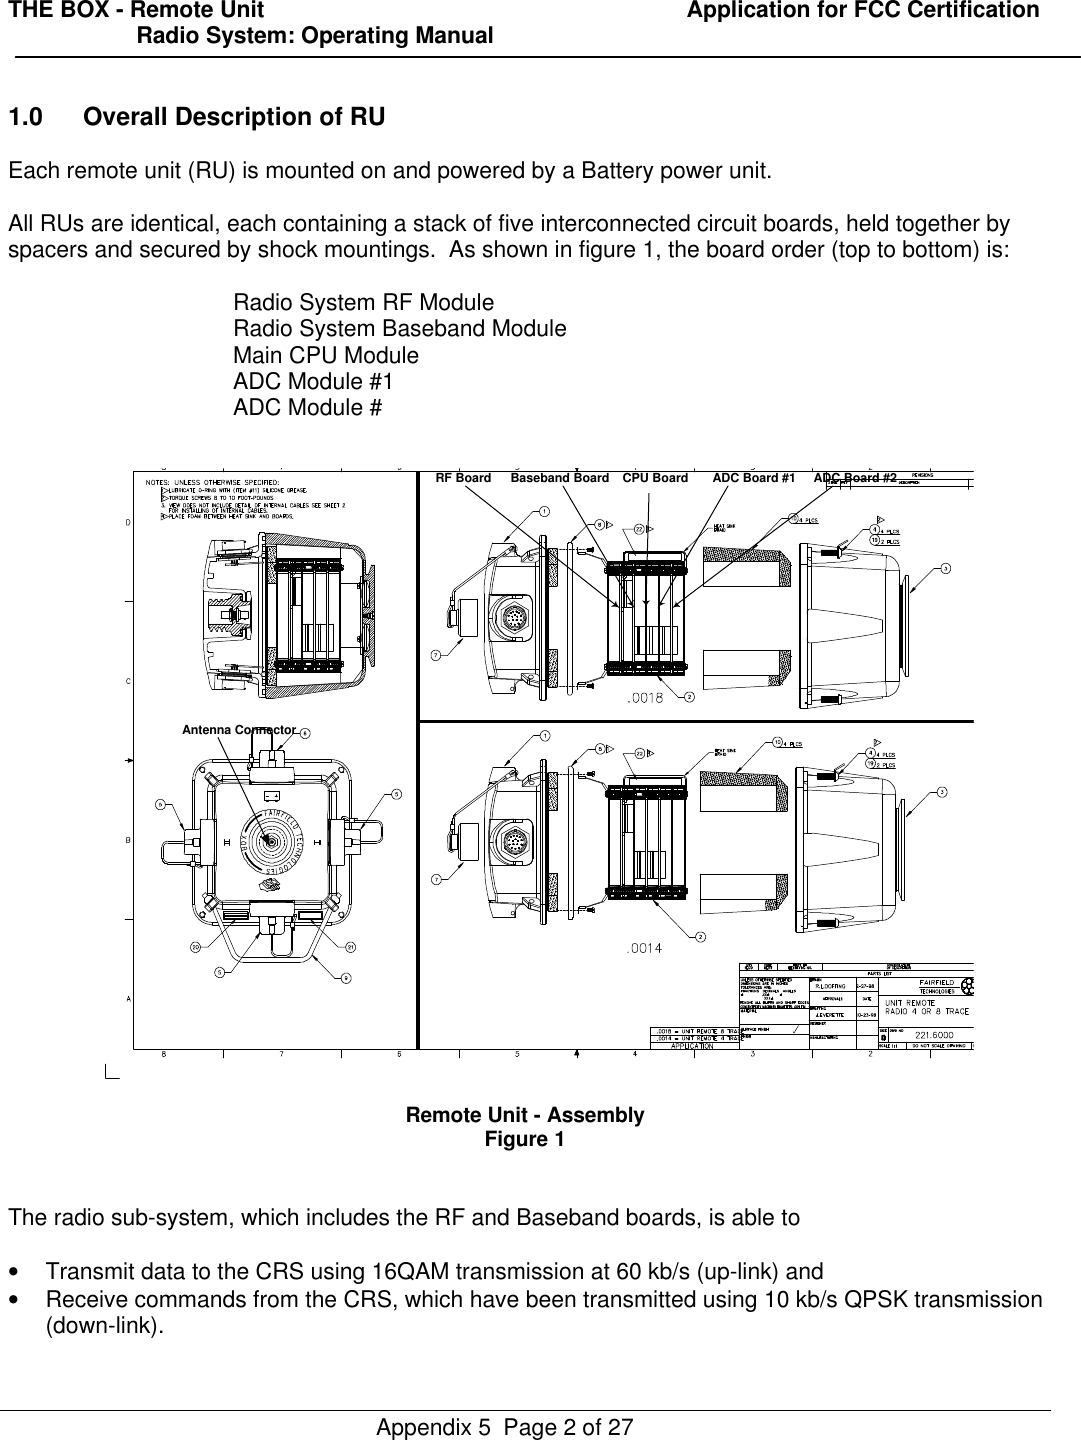 THE BOX - Remote Unit                                                                  Application for FCC Certification                    Radio System: Operating ManualAppendix 5  Page 2 of 271.0 Overall Description of RUEach remote unit (RU) is mounted on and powered by a Battery power unit.All RUs are identical, each containing a stack of five interconnected circuit boards, held together byspacers and secured by shock mountings.  As shown in figure 1, the board order (top to bottom) is:Radio System RF ModuleRadio System Baseband ModuleMain CPU ModuleADC Module #1ADC Module #Remote Unit - AssemblyFigure 1The radio sub-system, which includes the RF and Baseband boards, is able to• Transmit data to the CRS using 16QAM transmission at 60 kb/s (up-link) and• Receive commands from the CRS, which have been transmitted using 10 kb/s QPSK transmission(down-link).RF Board Baseband Board CPU Board ADC Board #1 ADC Board #2Antenna Connector